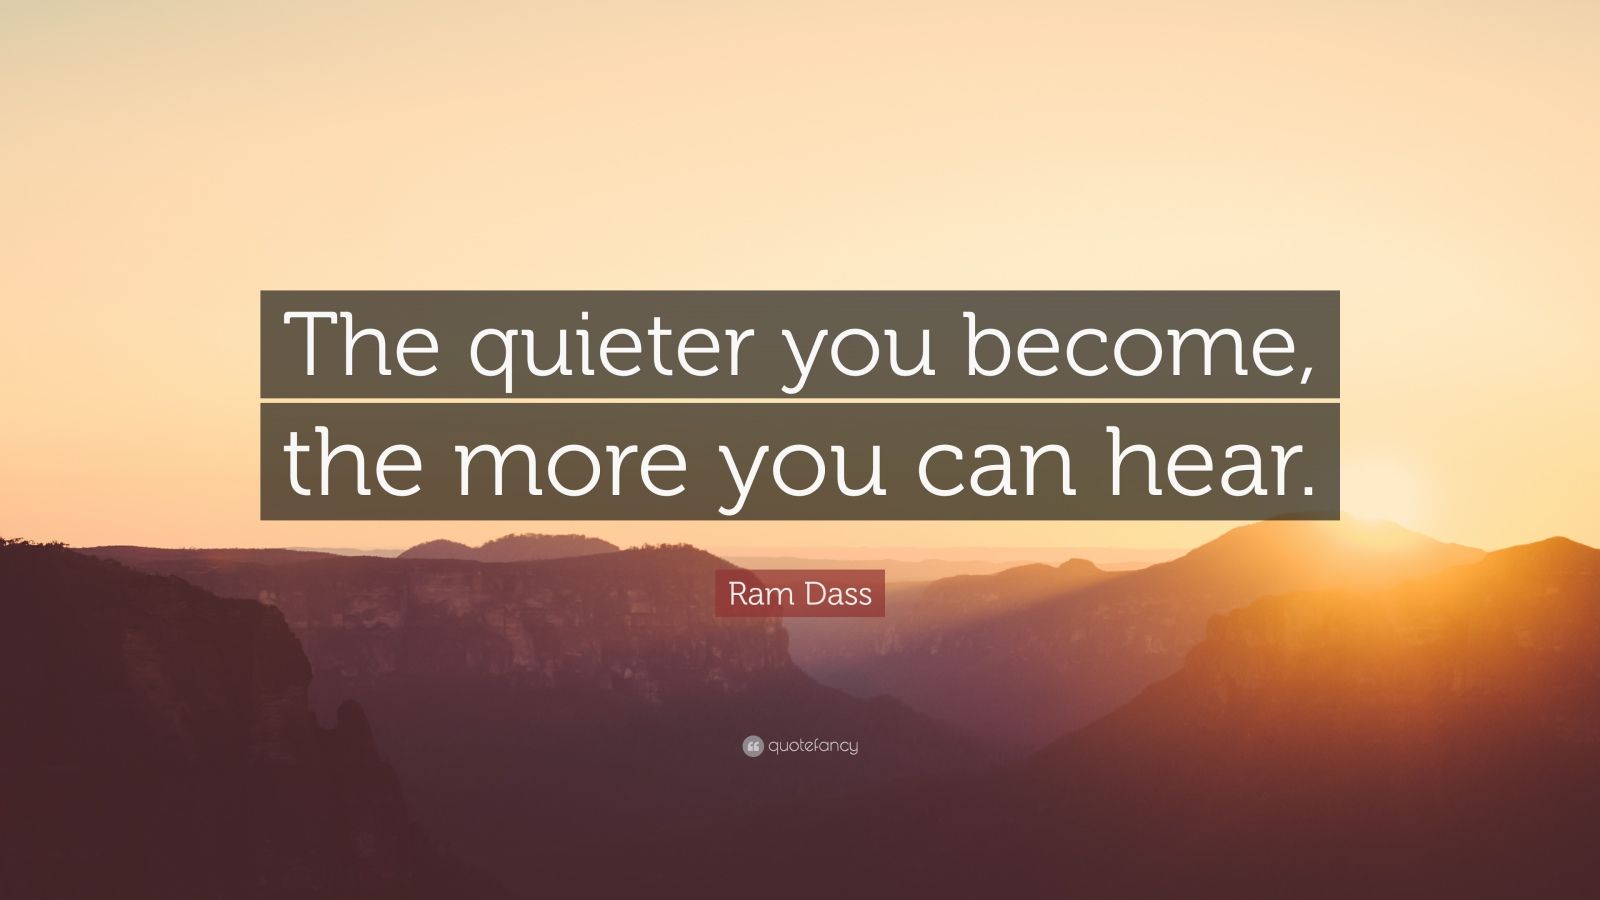 Ram Dass Quote: “The quieter you become, the more you can hear.” (20 ...